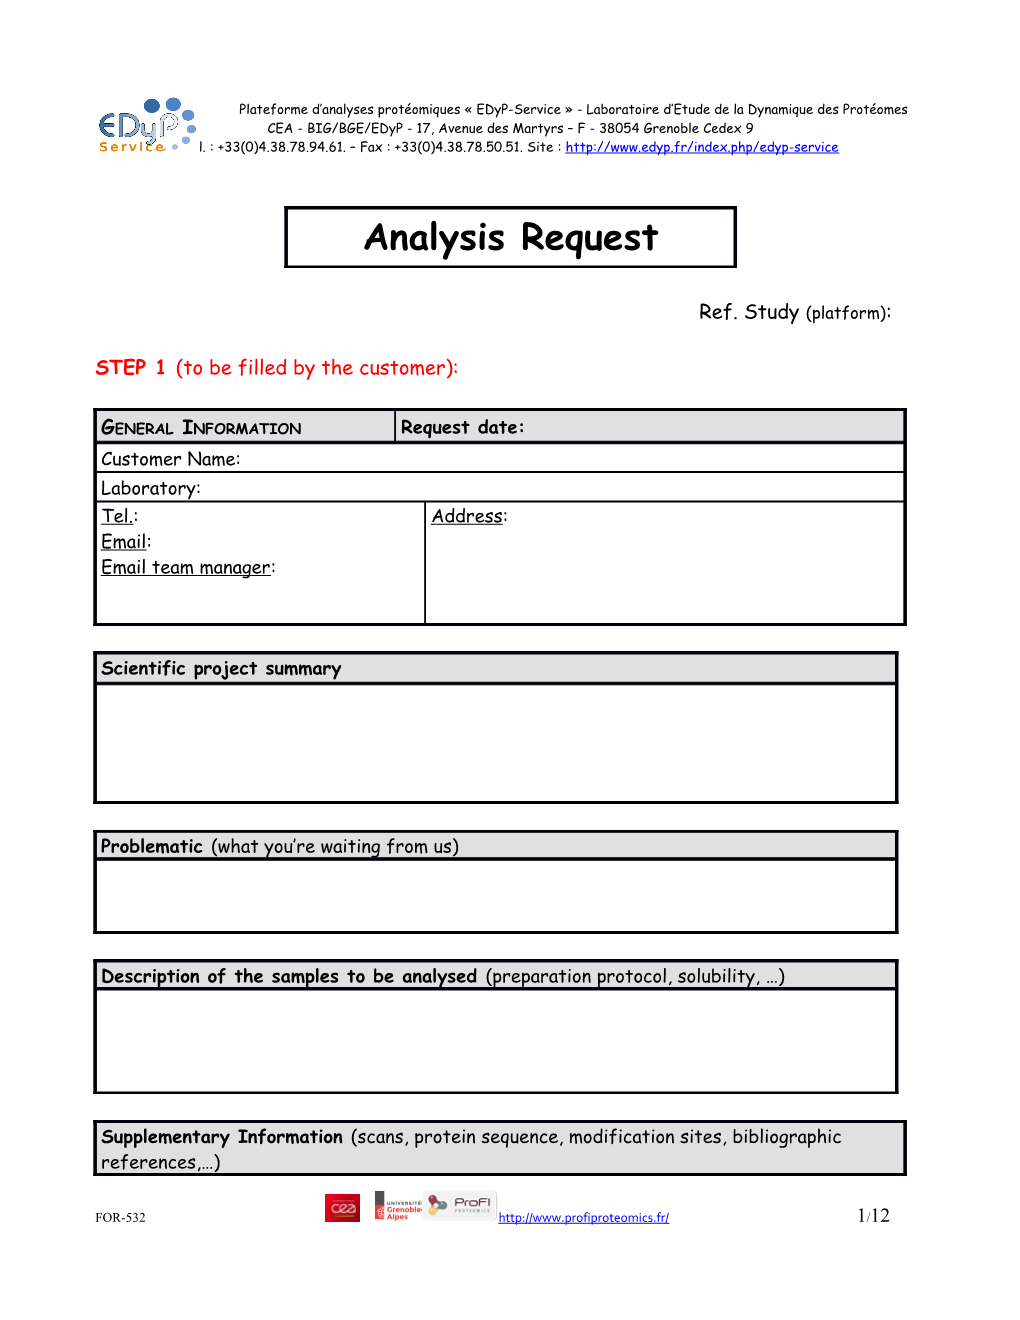 New Analysis Request